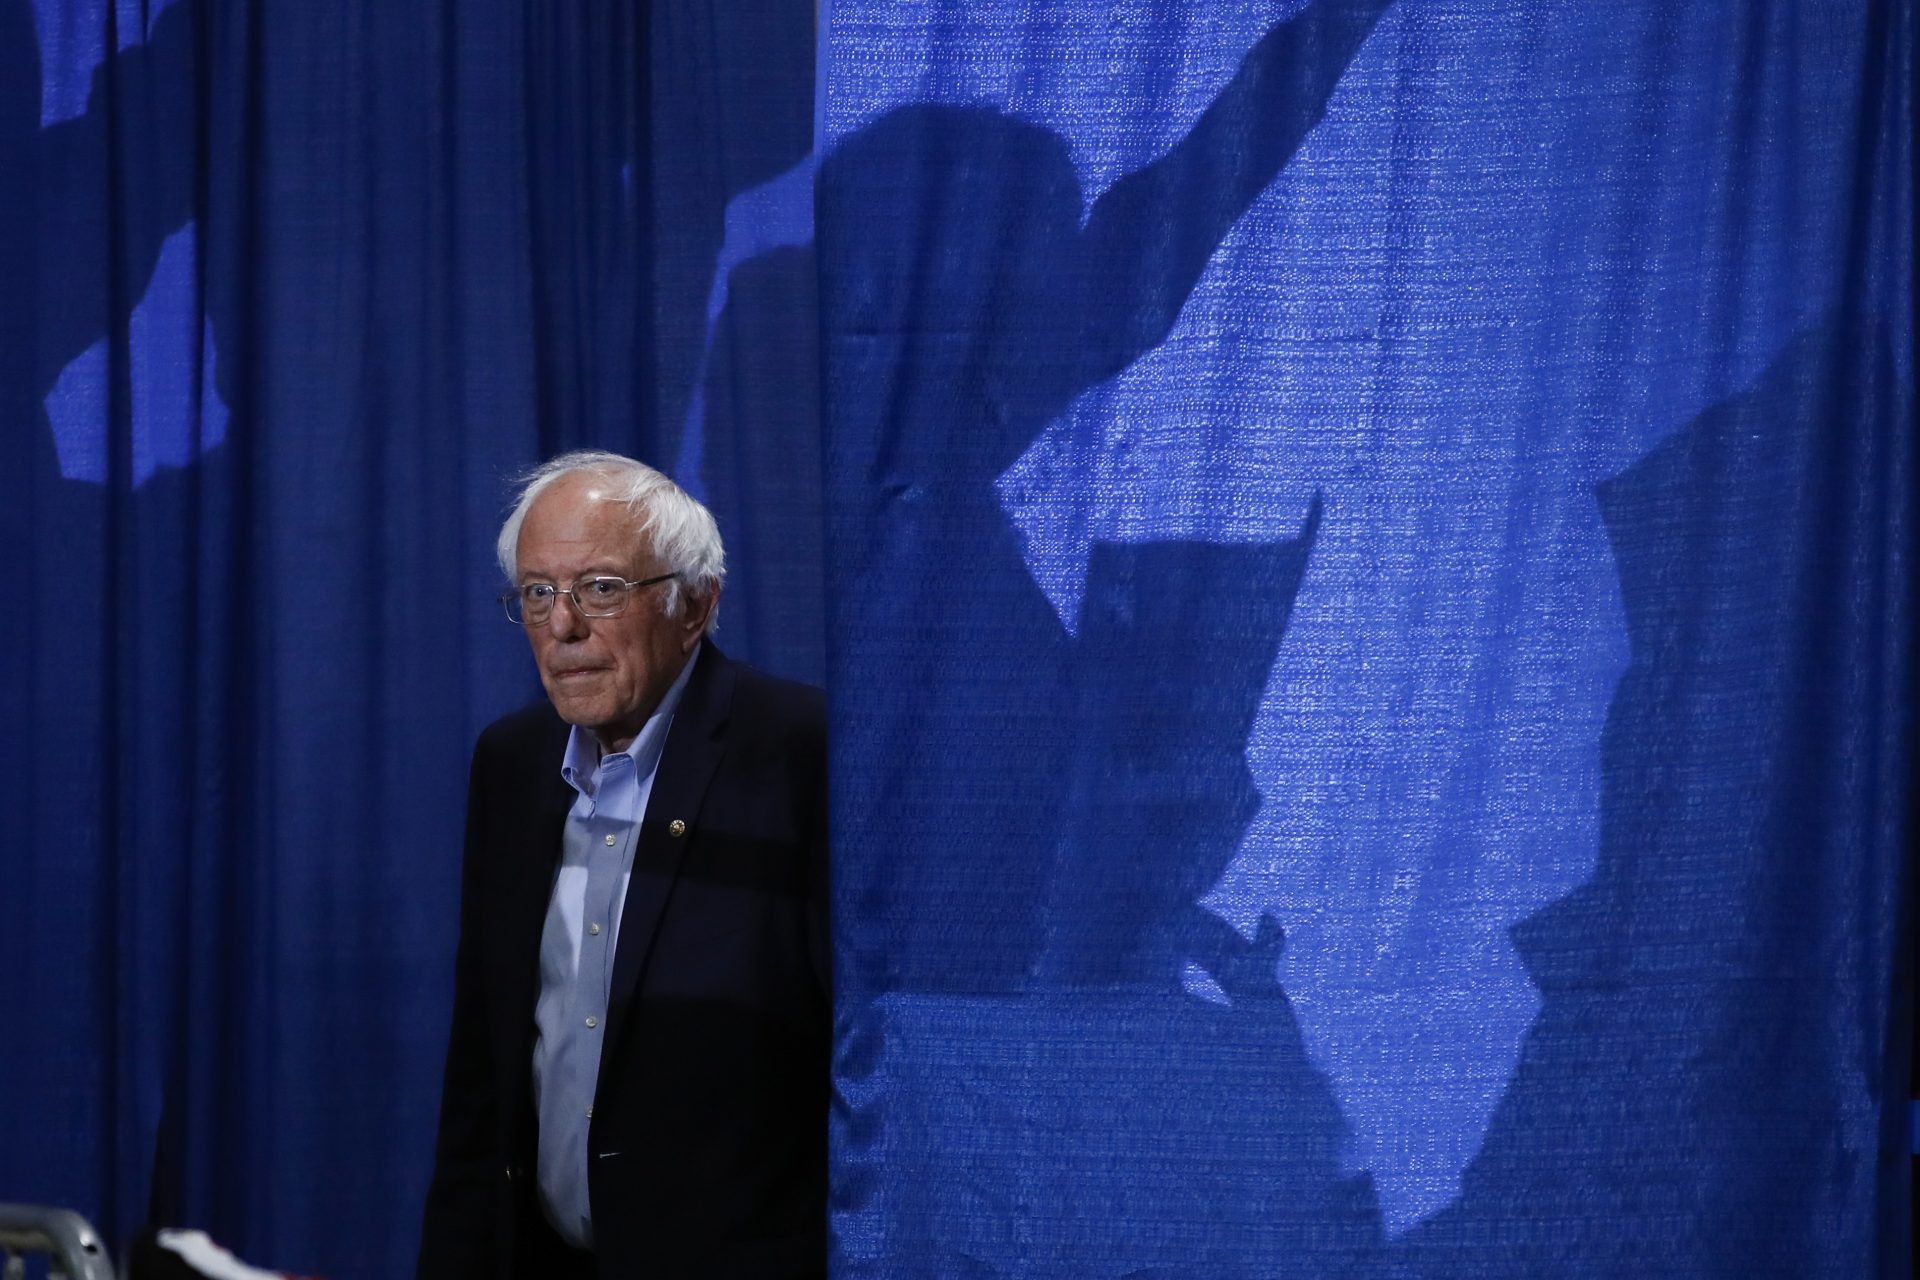 Democratic presidential candidate Sen. Bernie Sanders, I-Vt., arrives for a primary night election rally in Essex Junction, Vt., Tuesday, March 3, 2020.